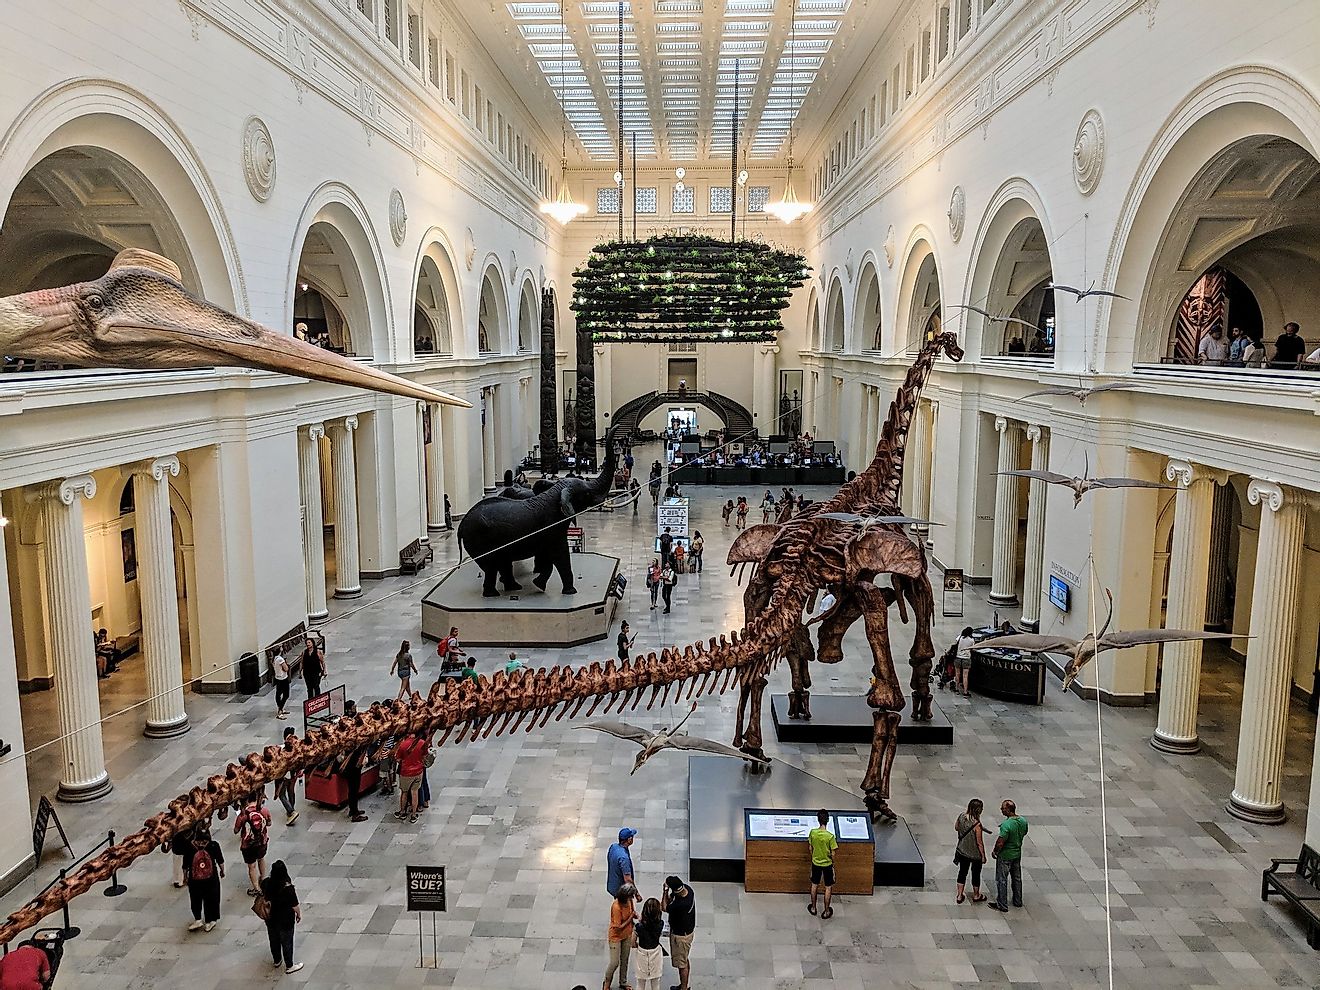 Field Museum, Chicago, Illinois. Image credit: Travis Wise/Flickr.com